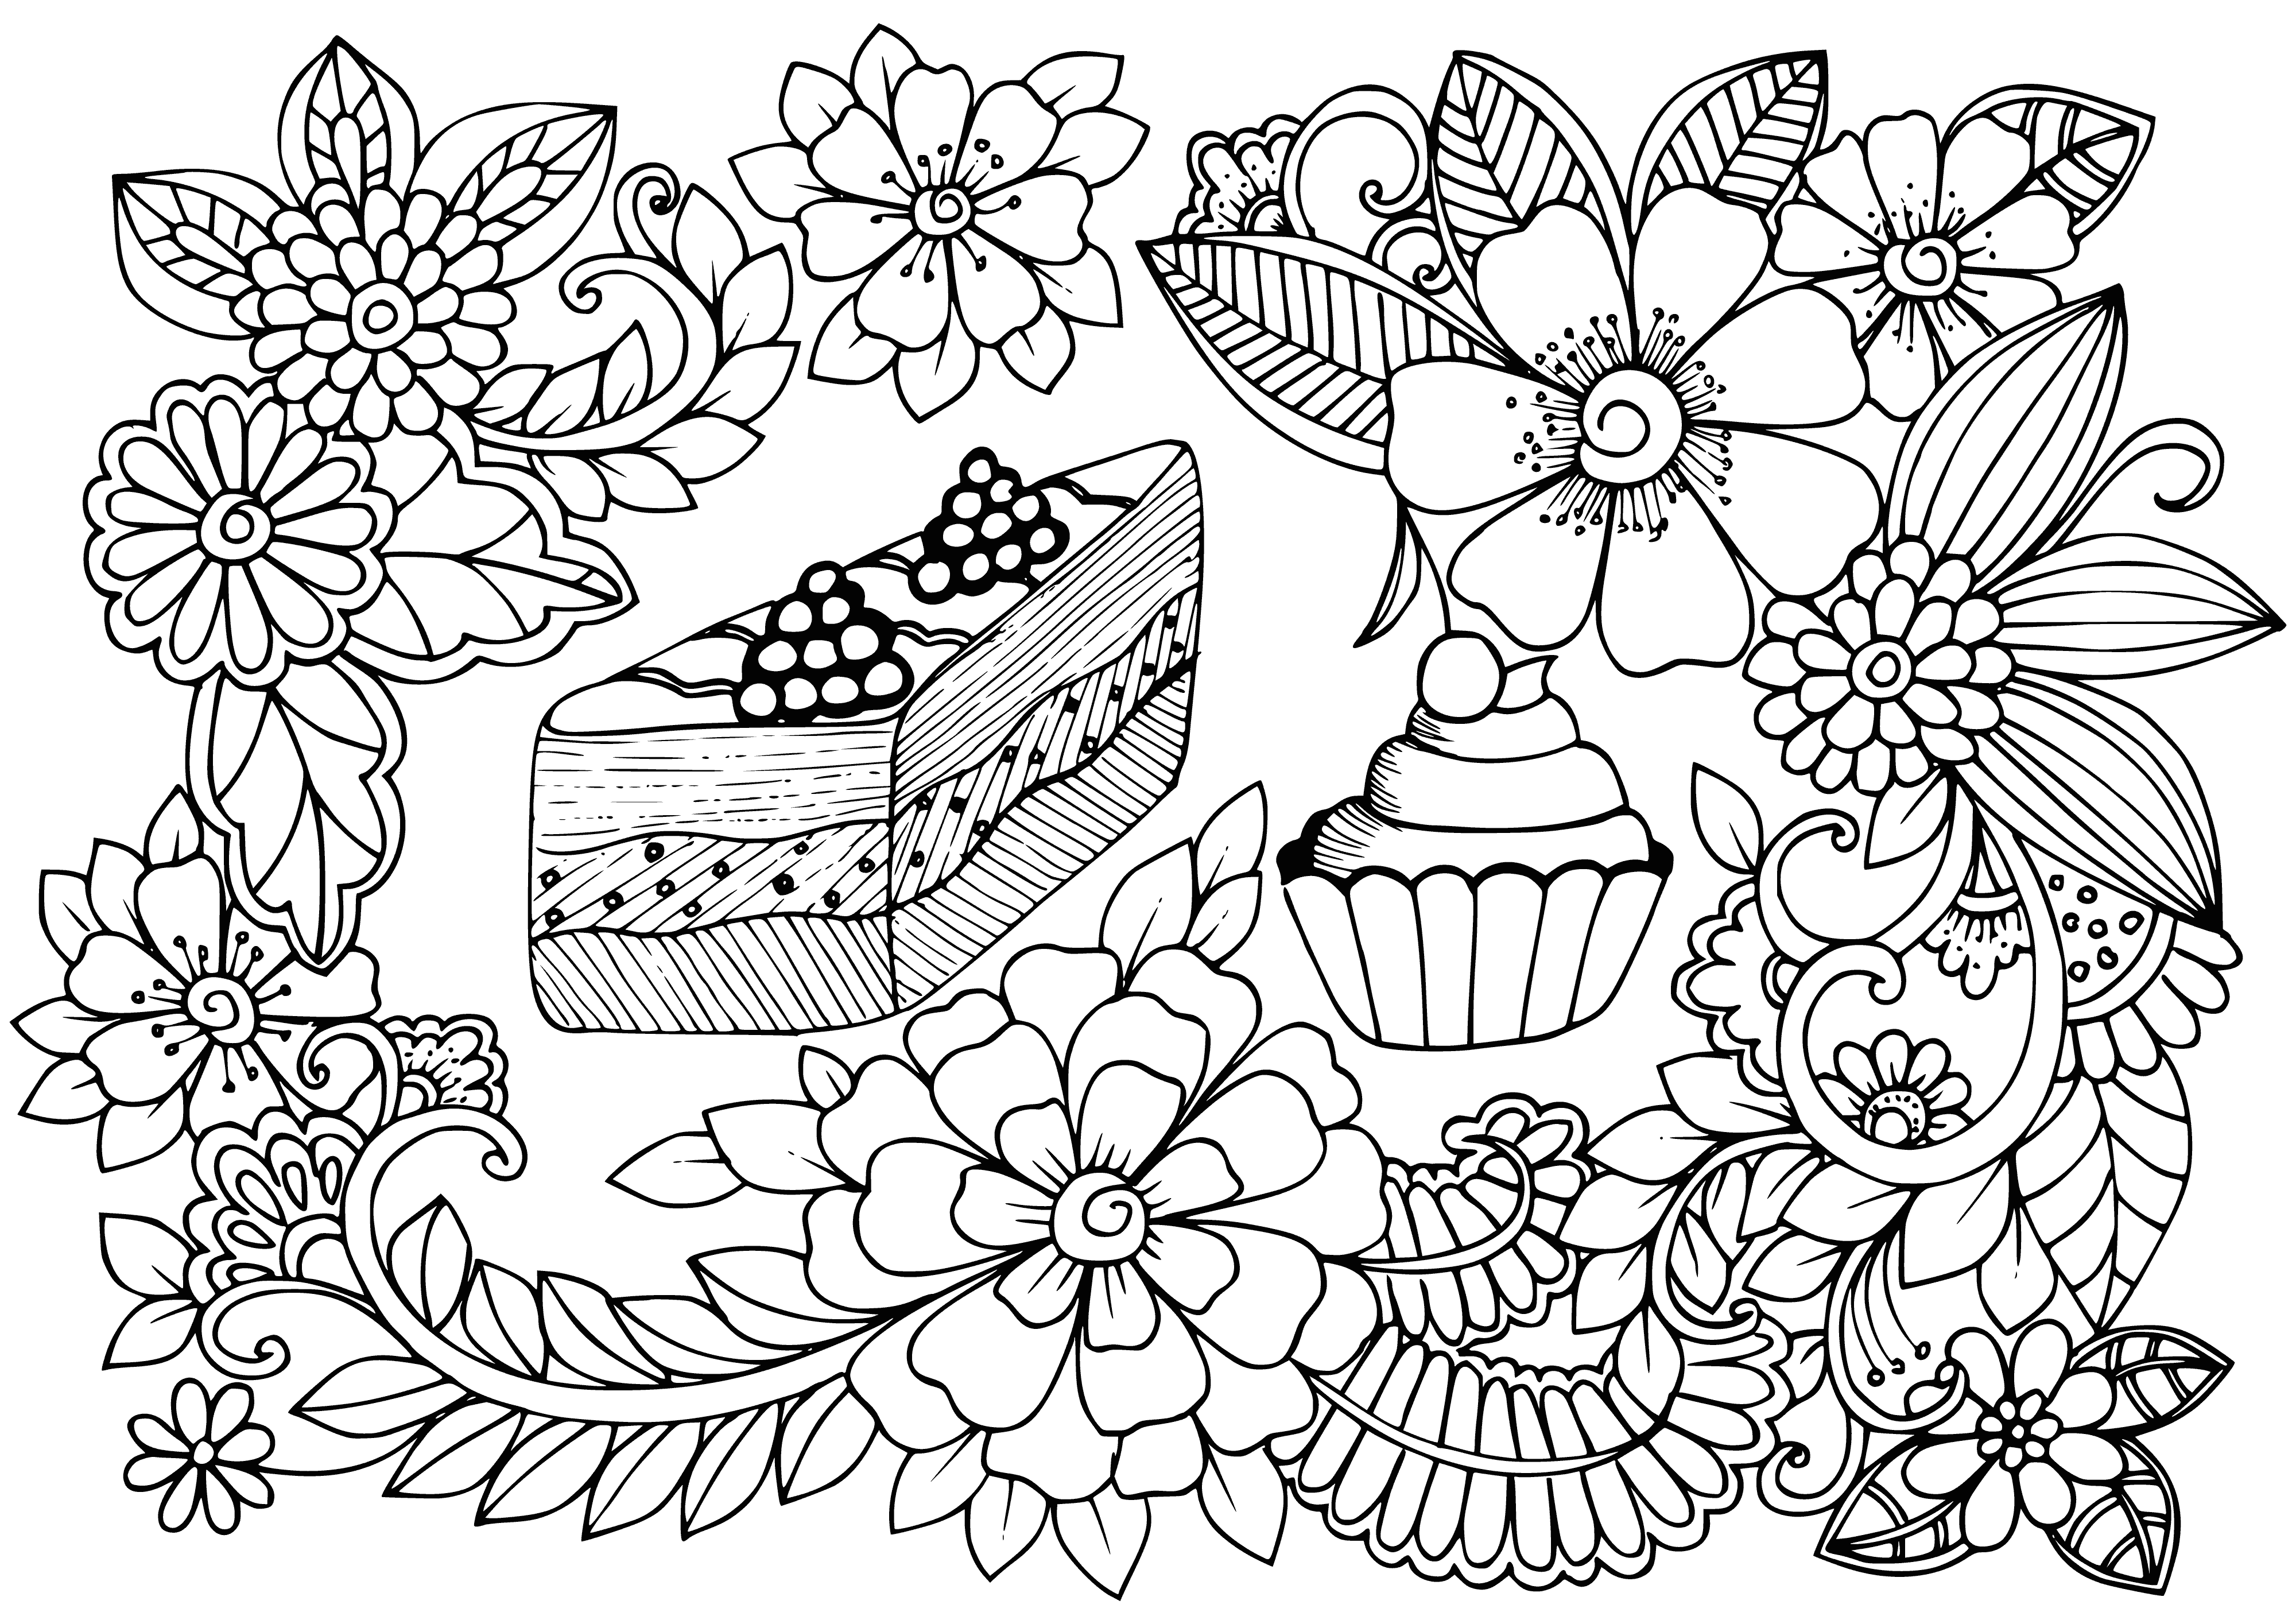 Flowers and dessert coloring page